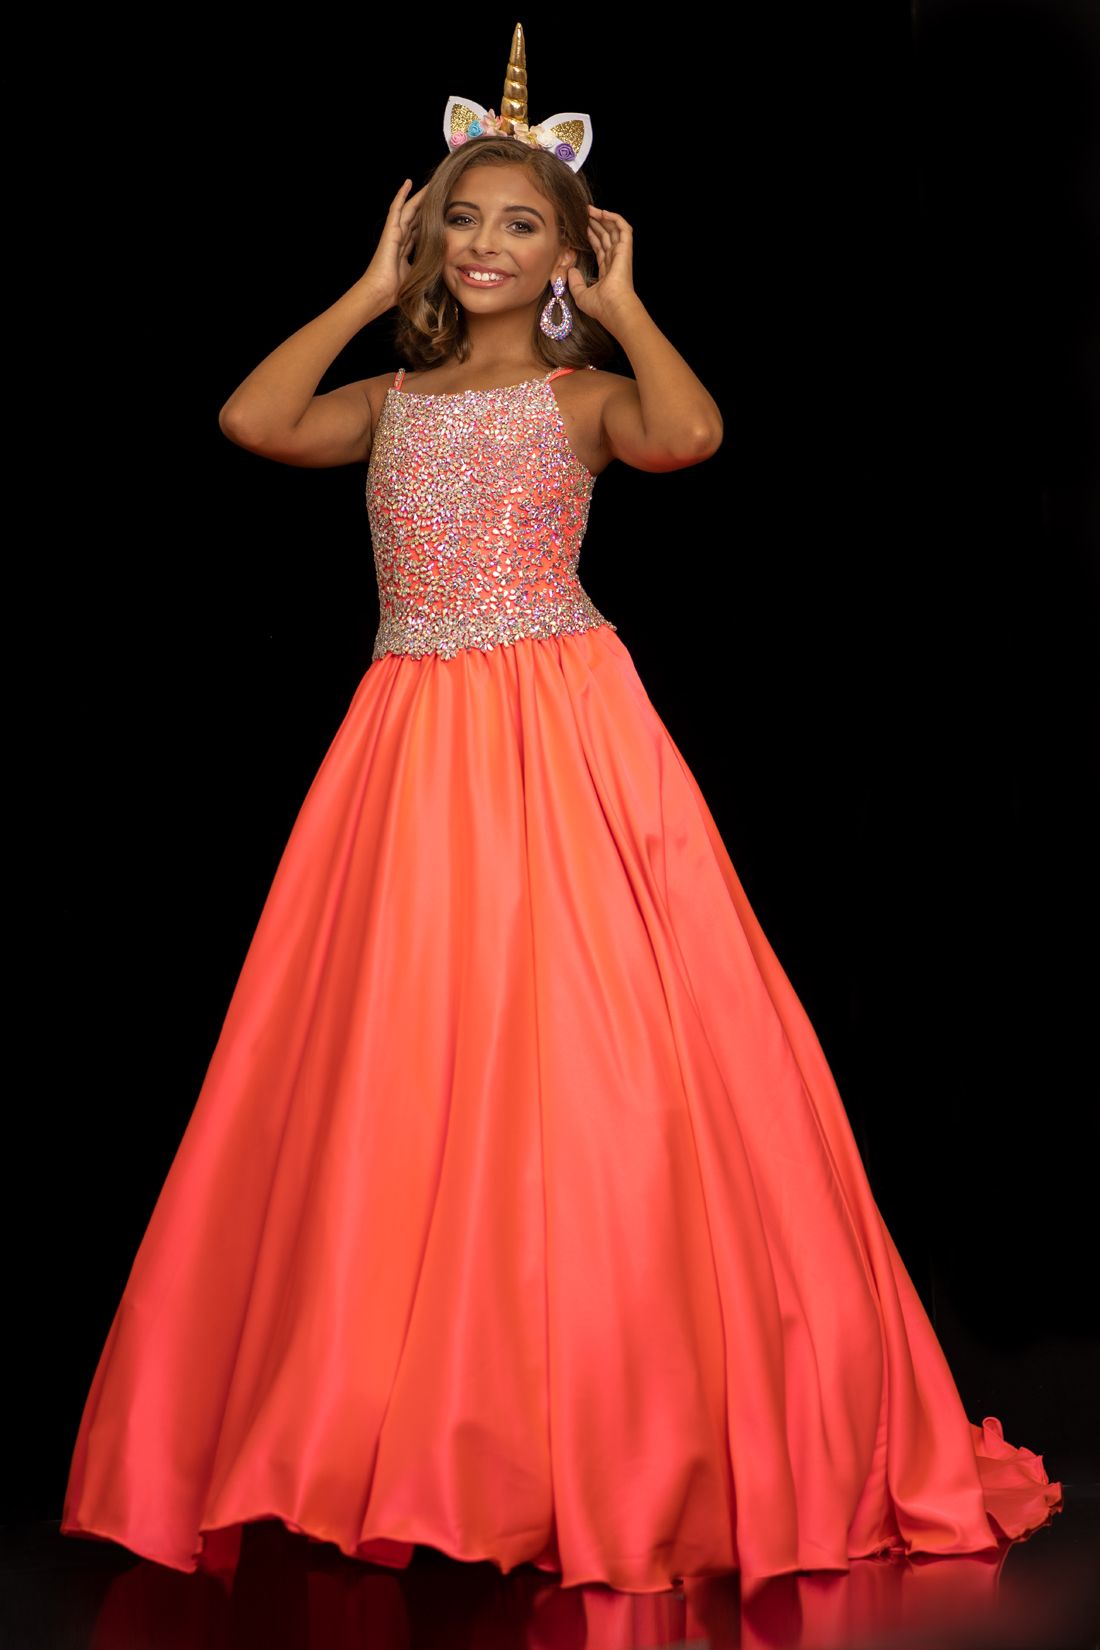 Sugar Kayne C134 by Johnathan Kayne Girls and Preteens long pageant gown with stone encrusted bodice with and embellished spaghetti straps.  The full ballgown skirt is made of Duchess Satin and has a sweeping train.  Available colors:  Hot Coral, Orchid, White  Available sizes:  2, 4, 6, 8, 10, 12, 14, 16 